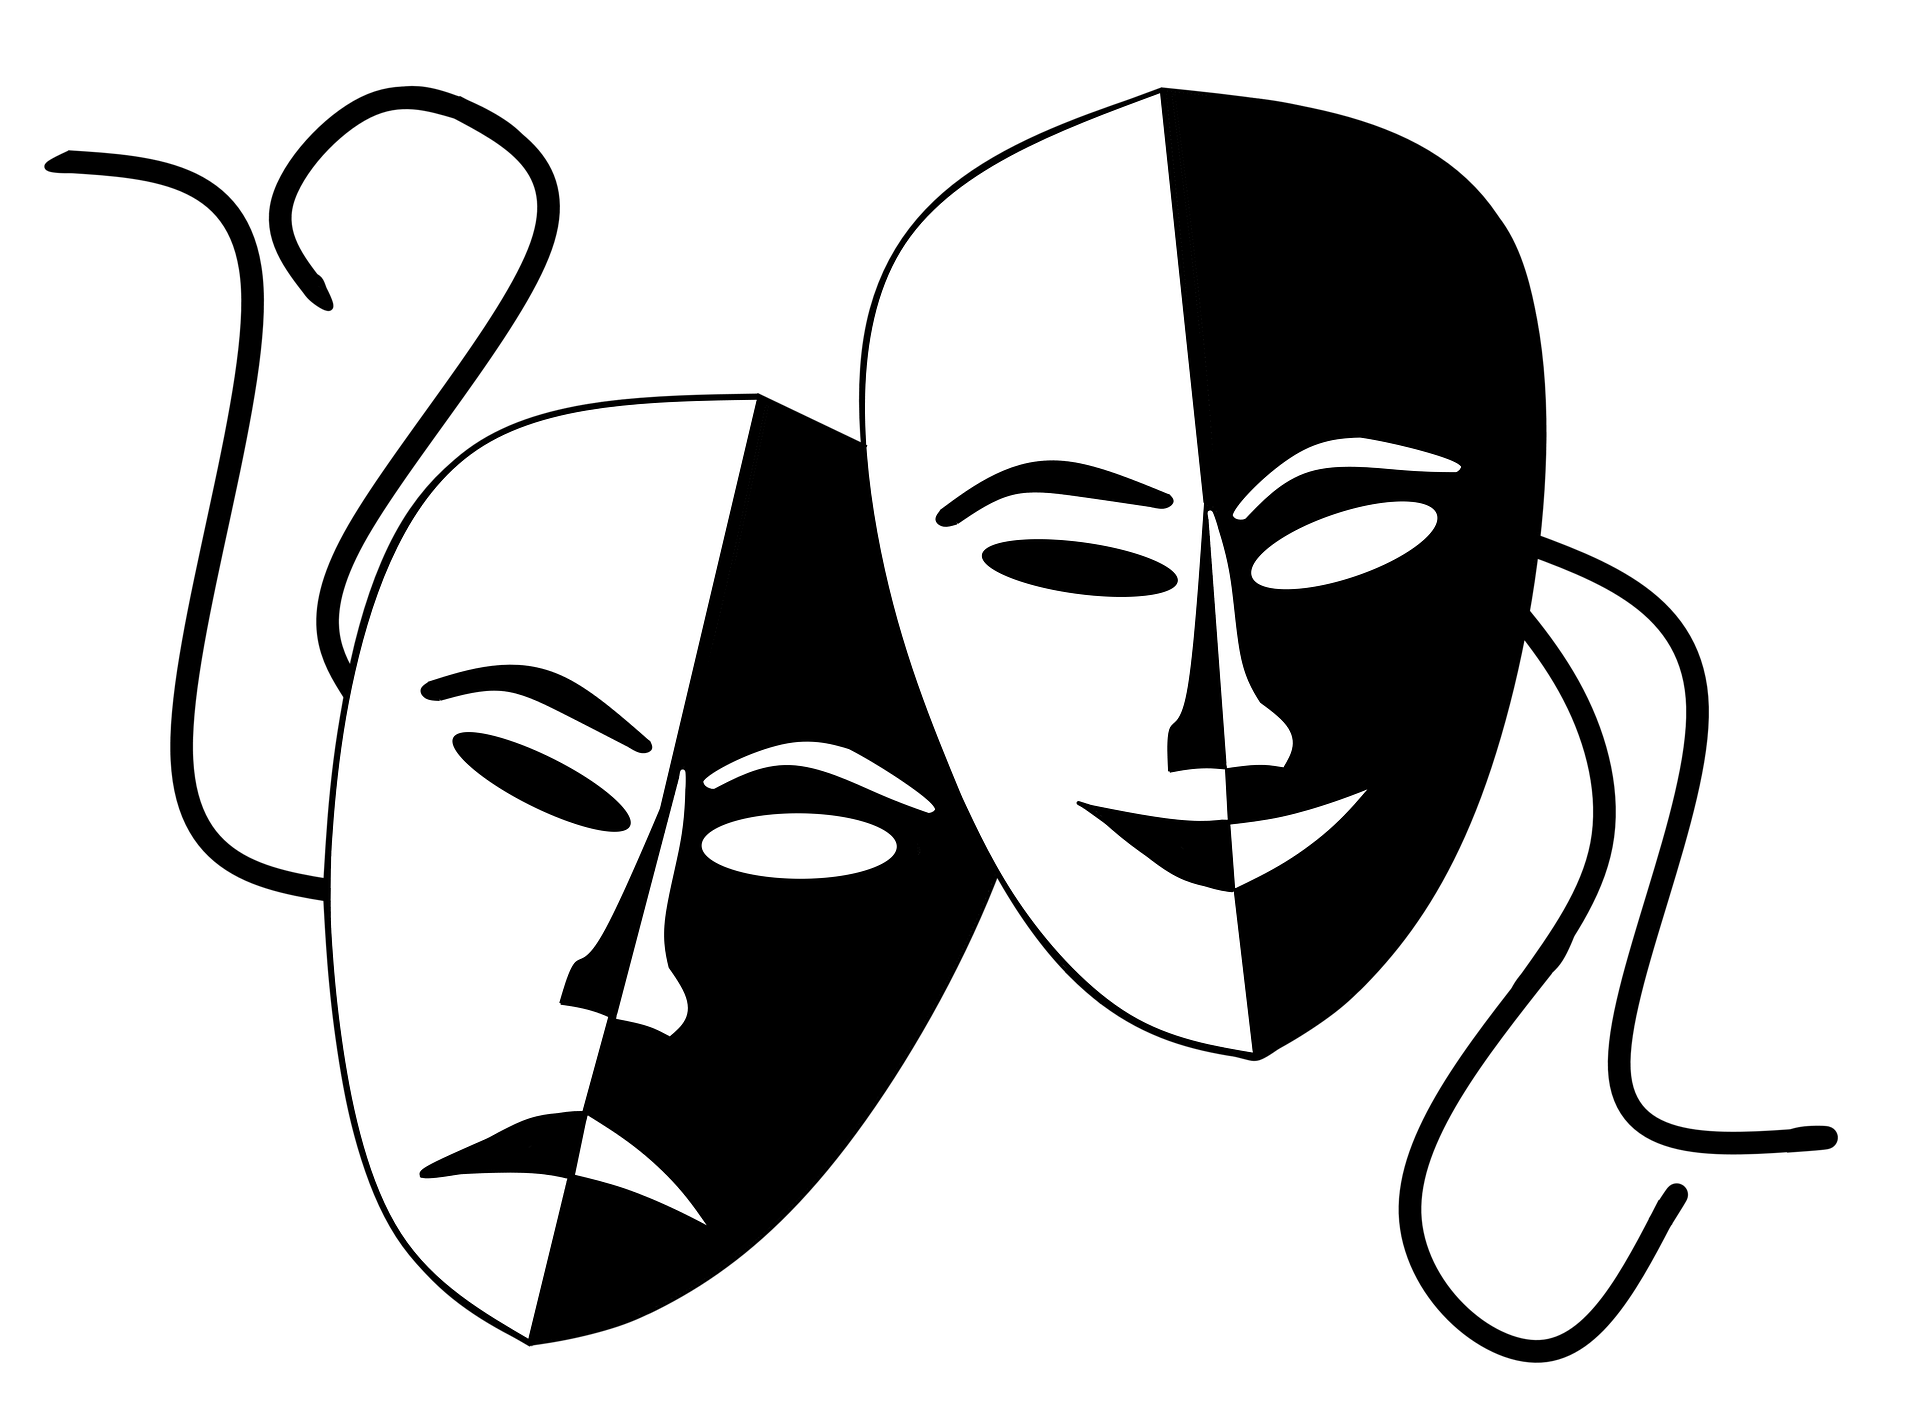 Black and white image of two theater masks